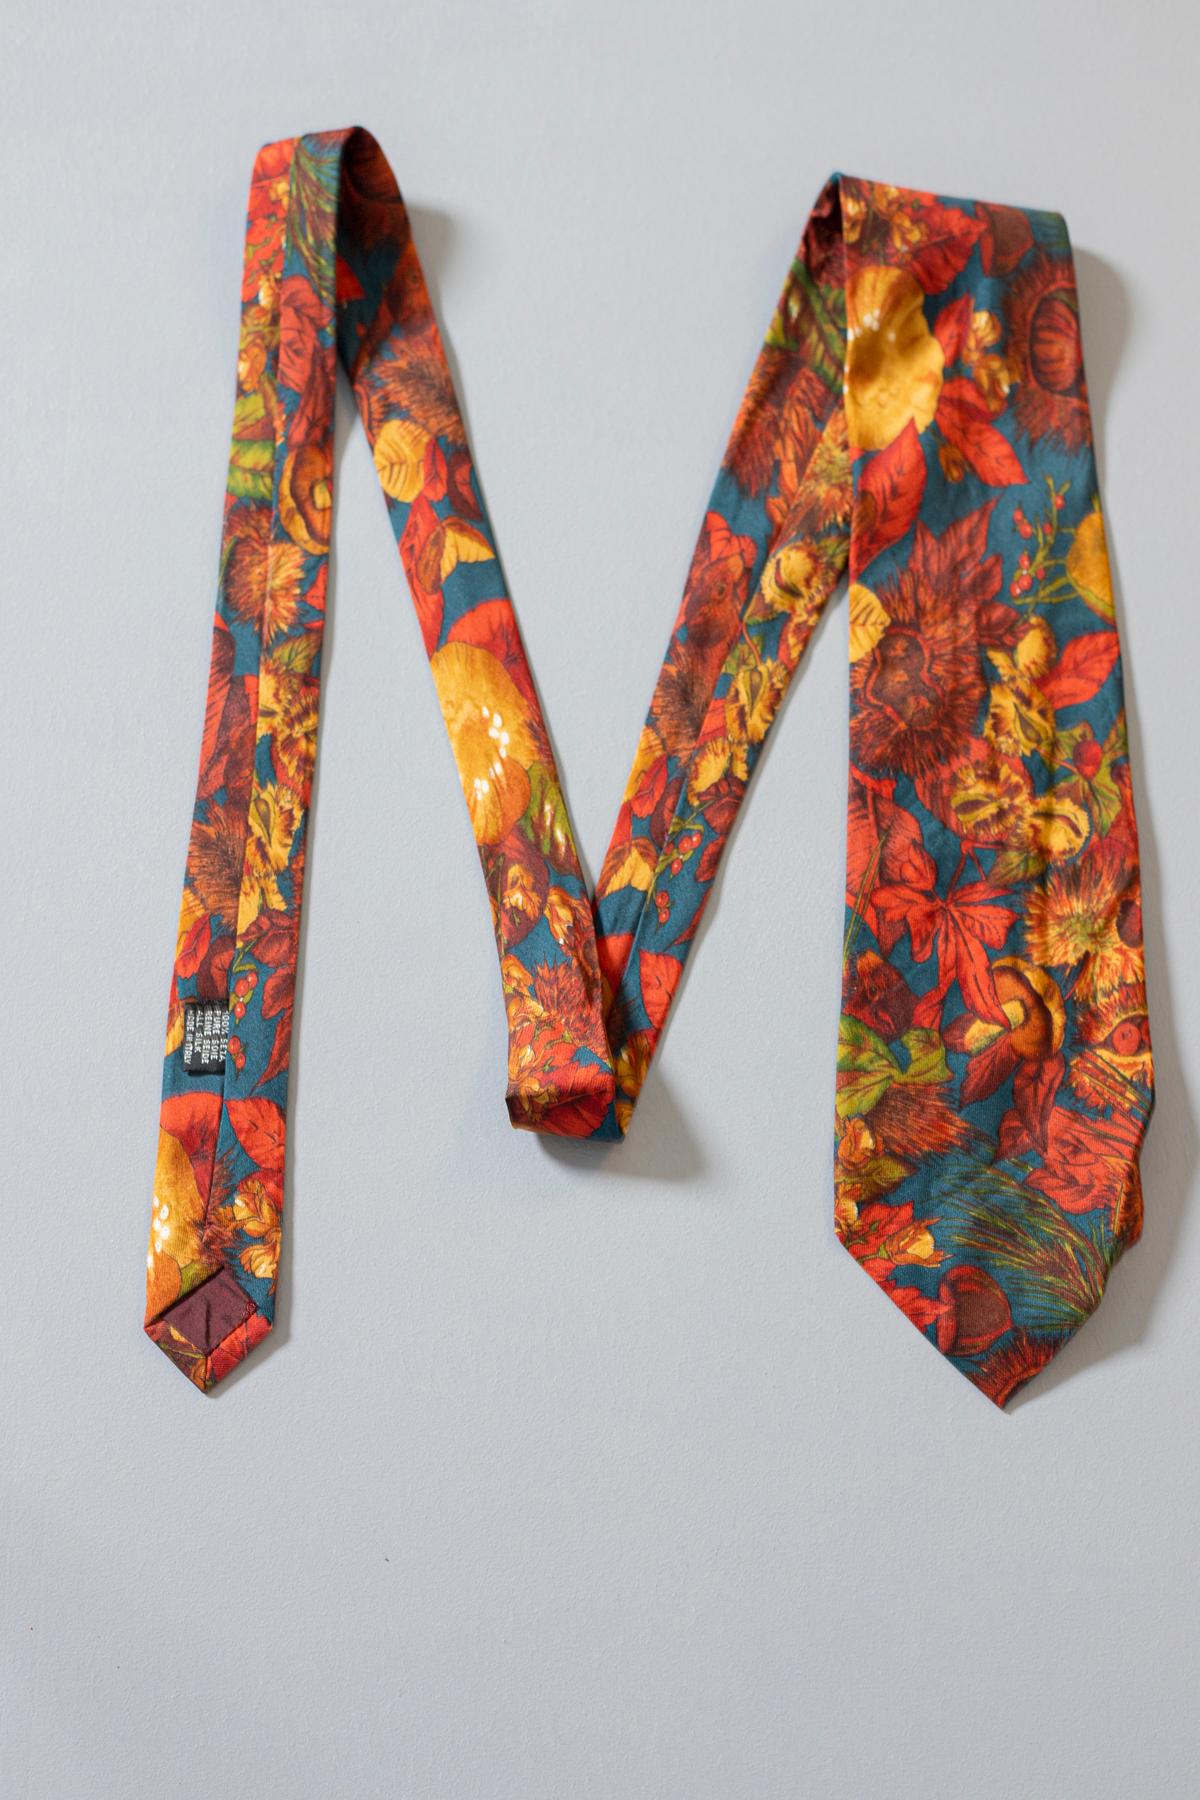 Colorful and particular tie designed by Reporter, it is made of silk. Decorated with designs of chestnut leaves and  squirrels, in bright and warm colors in shades of red.
It is the perfect tie for lovers of particular designs who want a look that